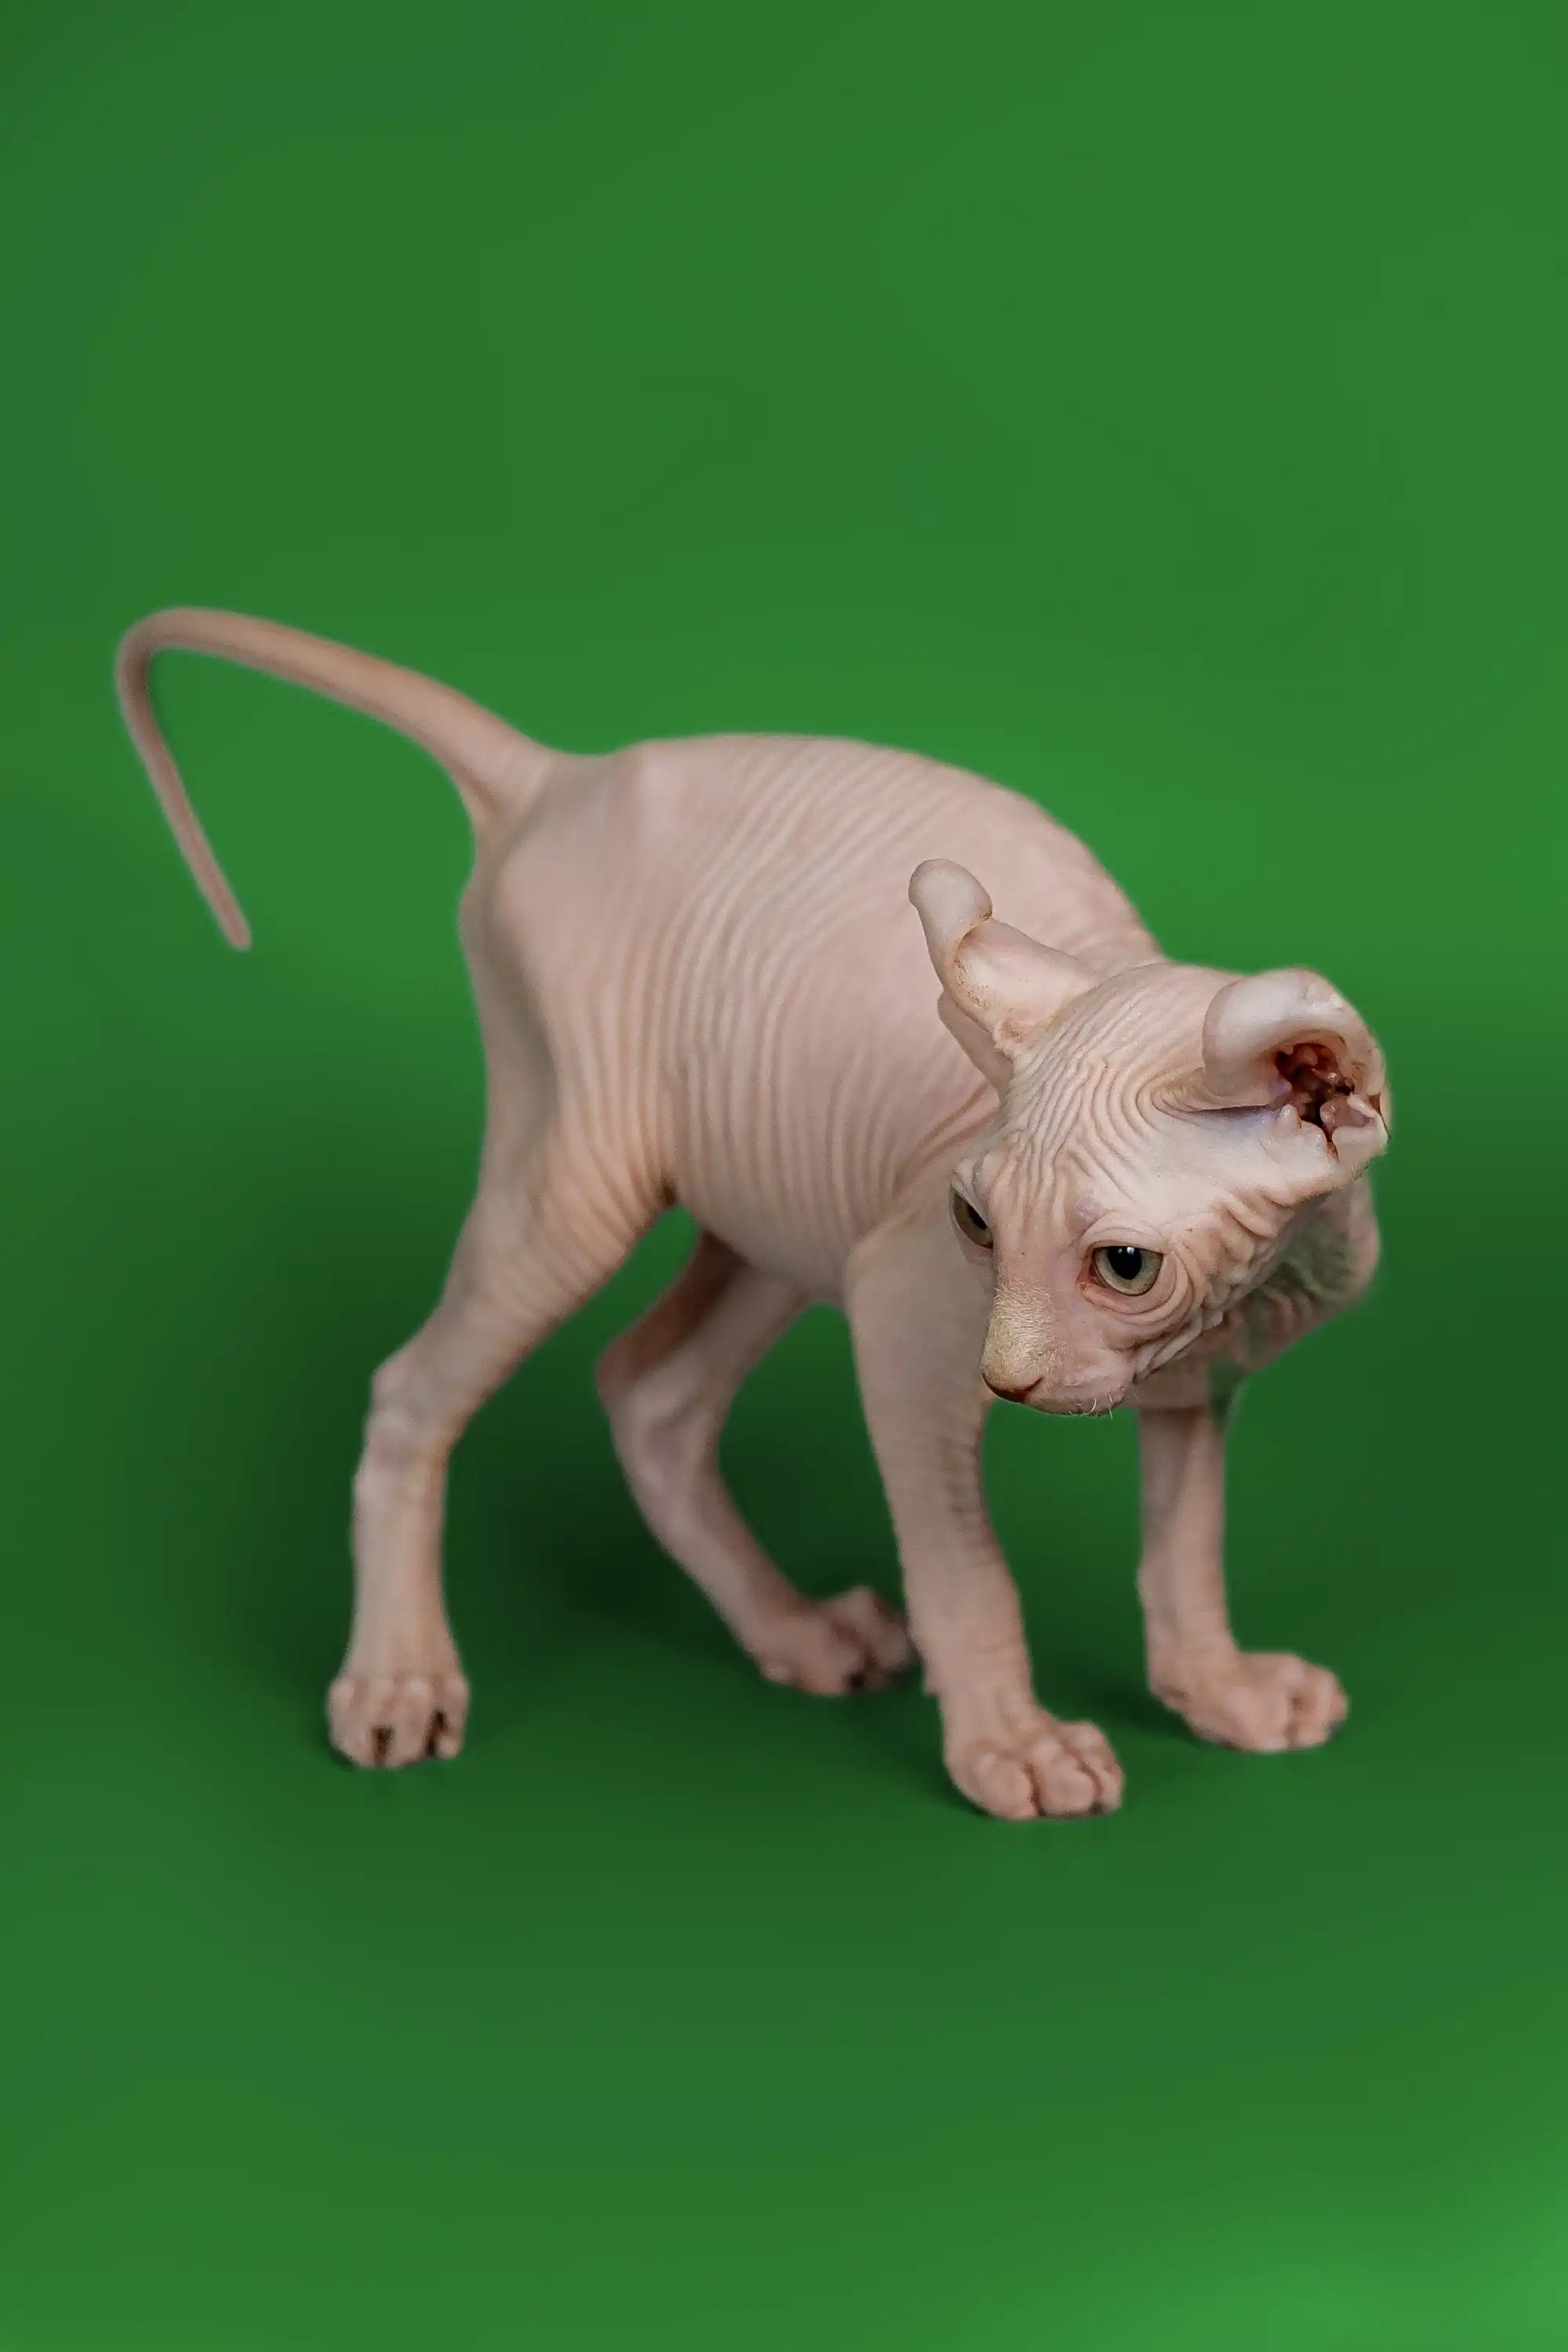 Sphynx Cats and Kittens for Sale Marco | Elf Kitten